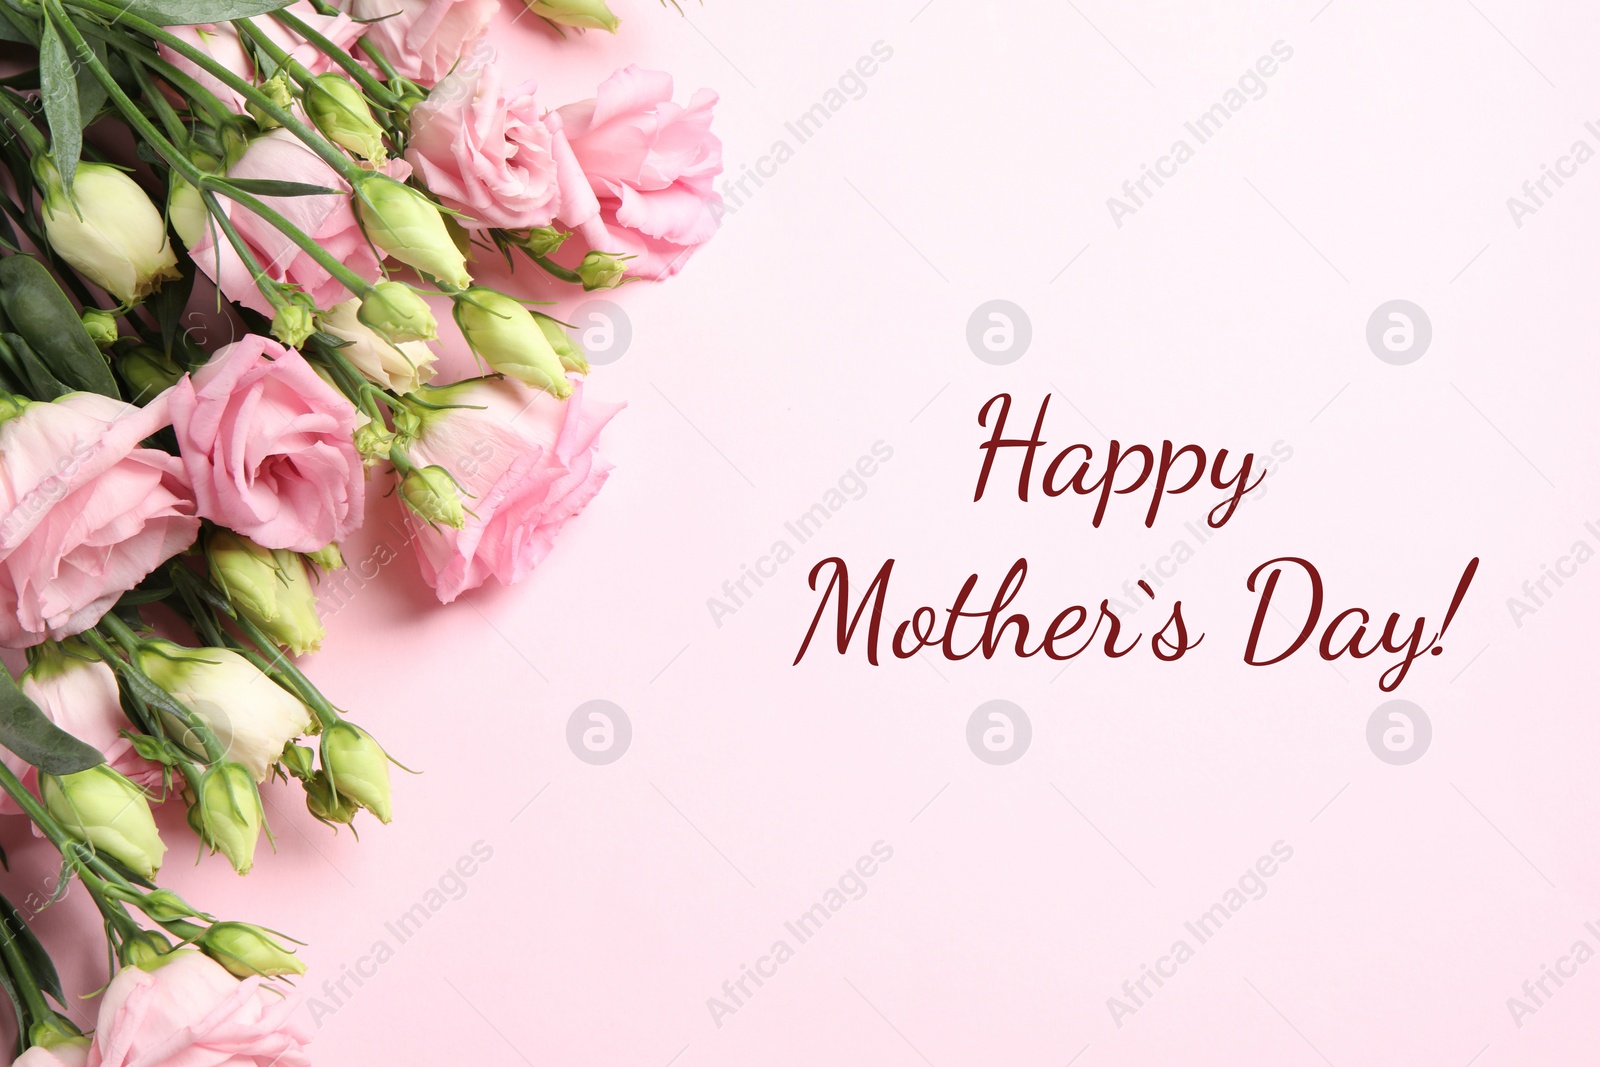 Image of Happy Mother's Day greeting card. Beautiful flowers on pink background